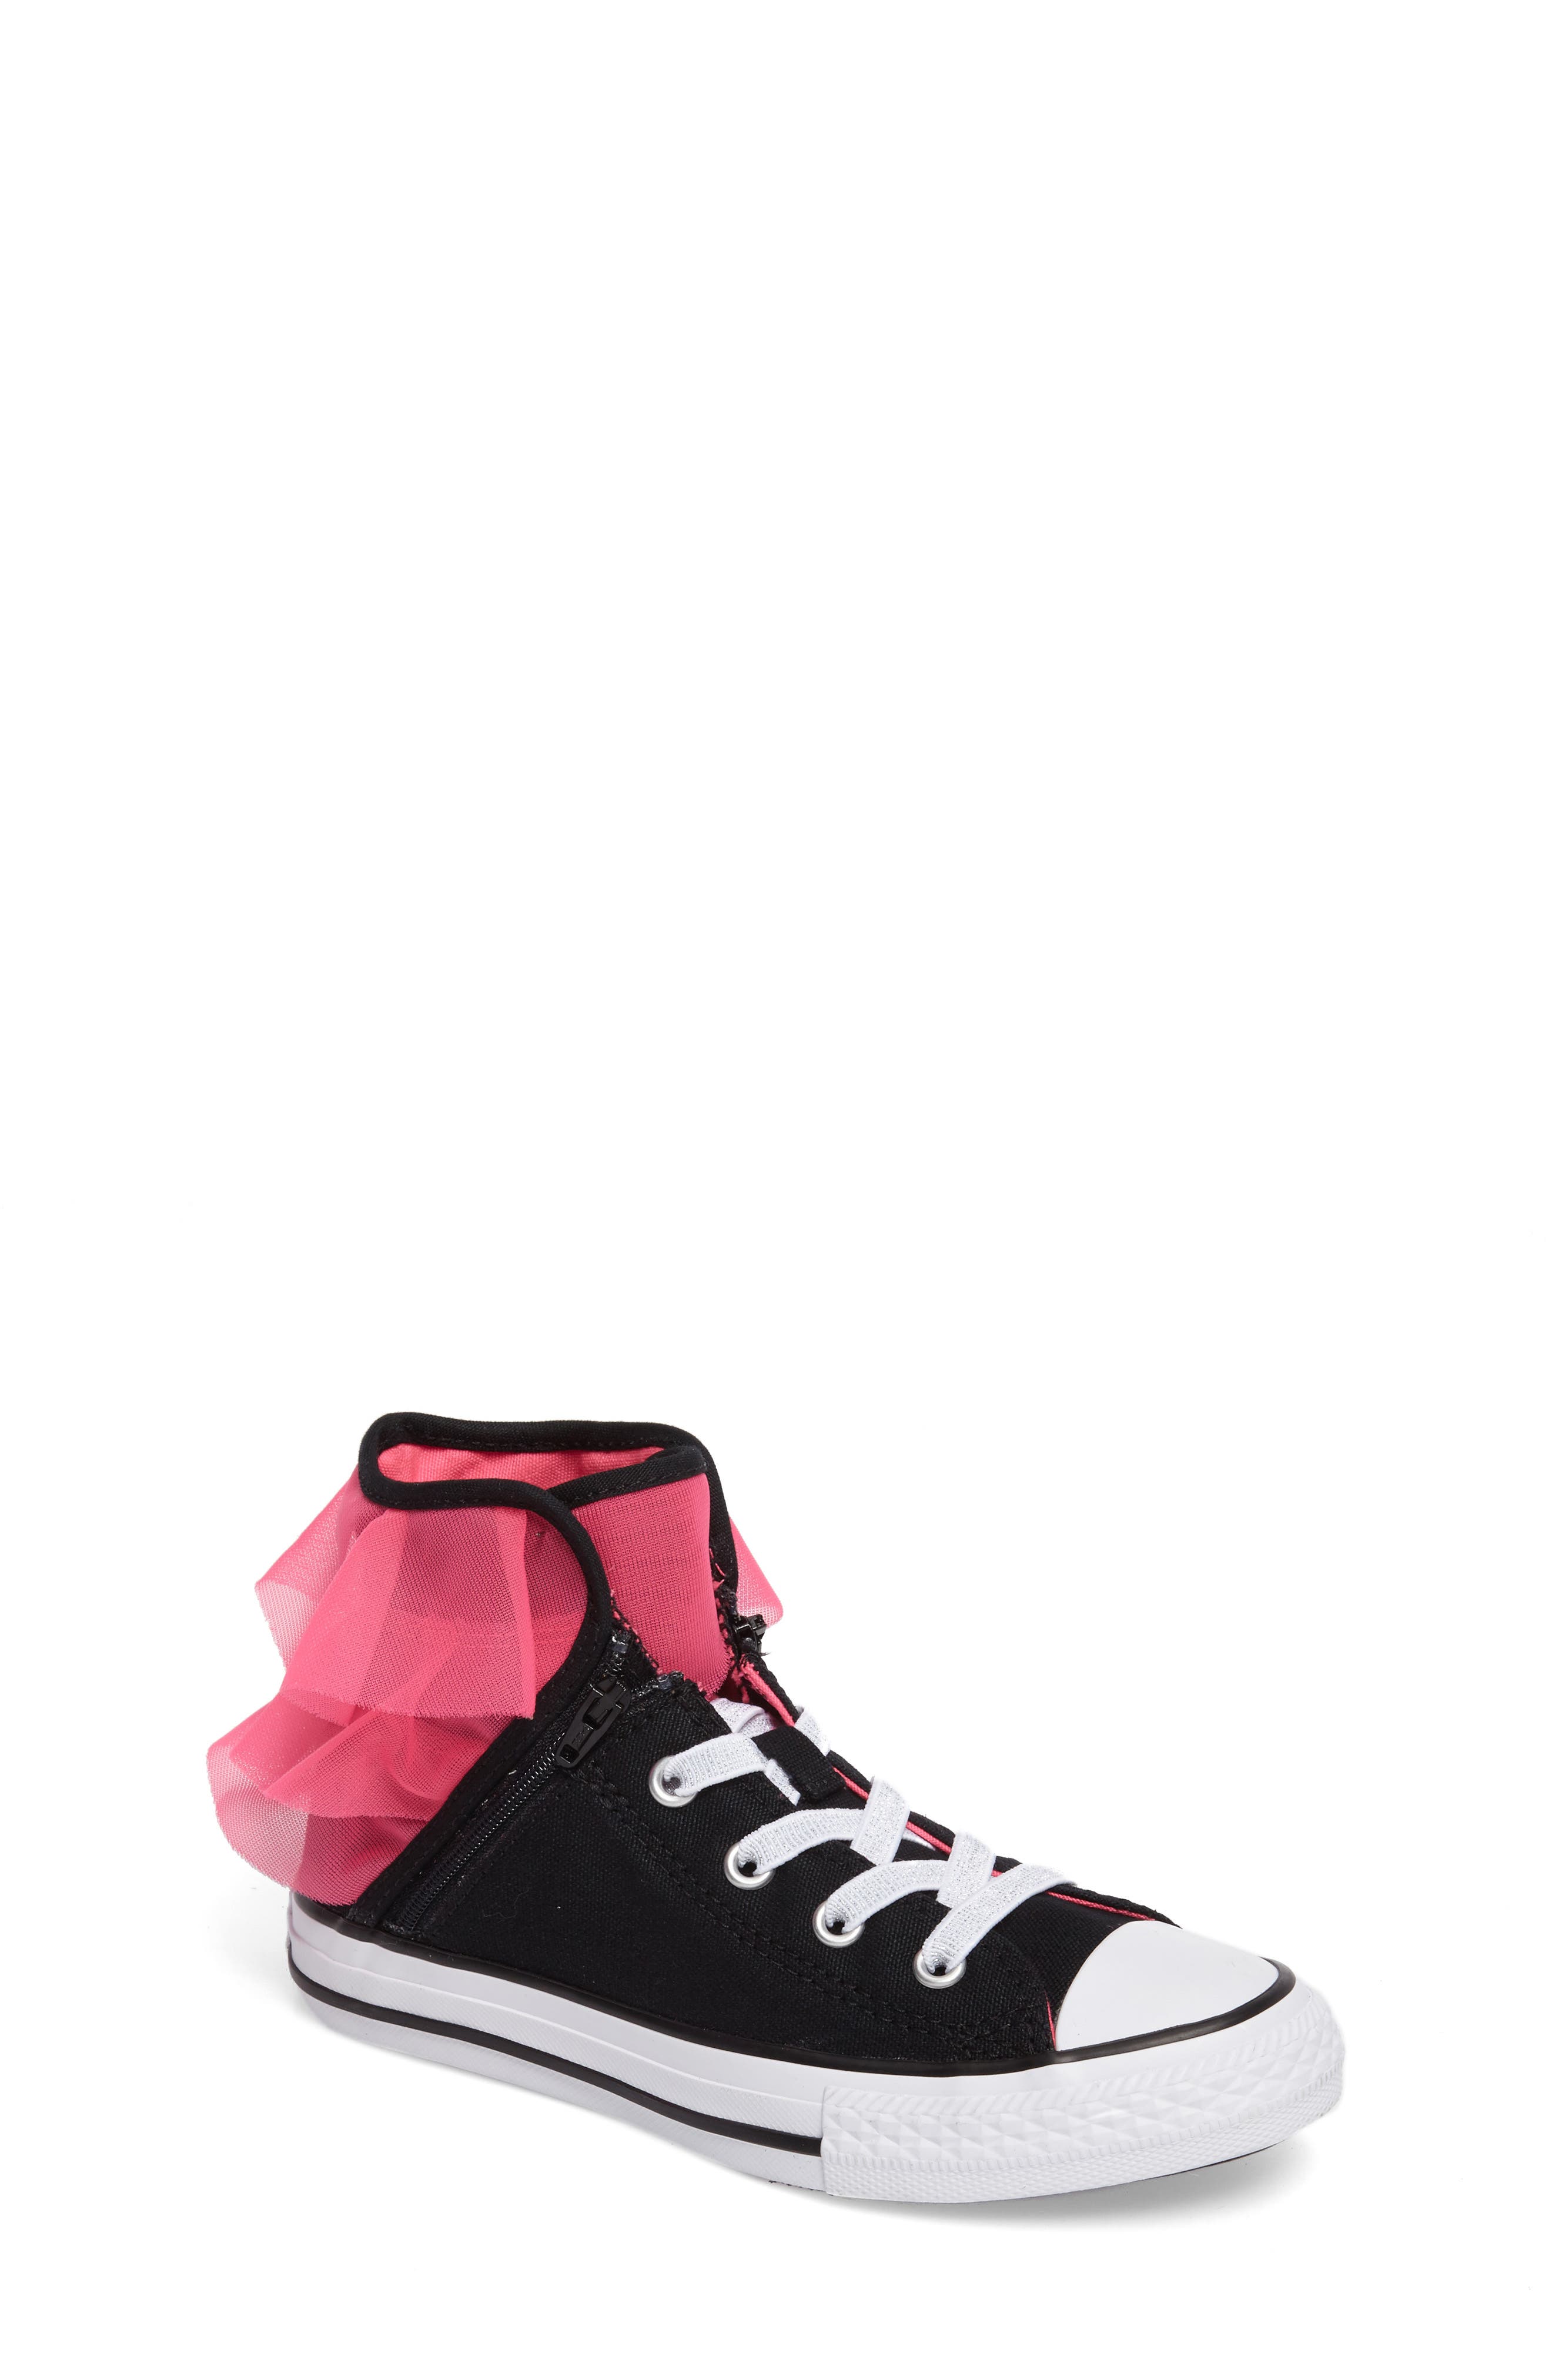 converse block party sneakers